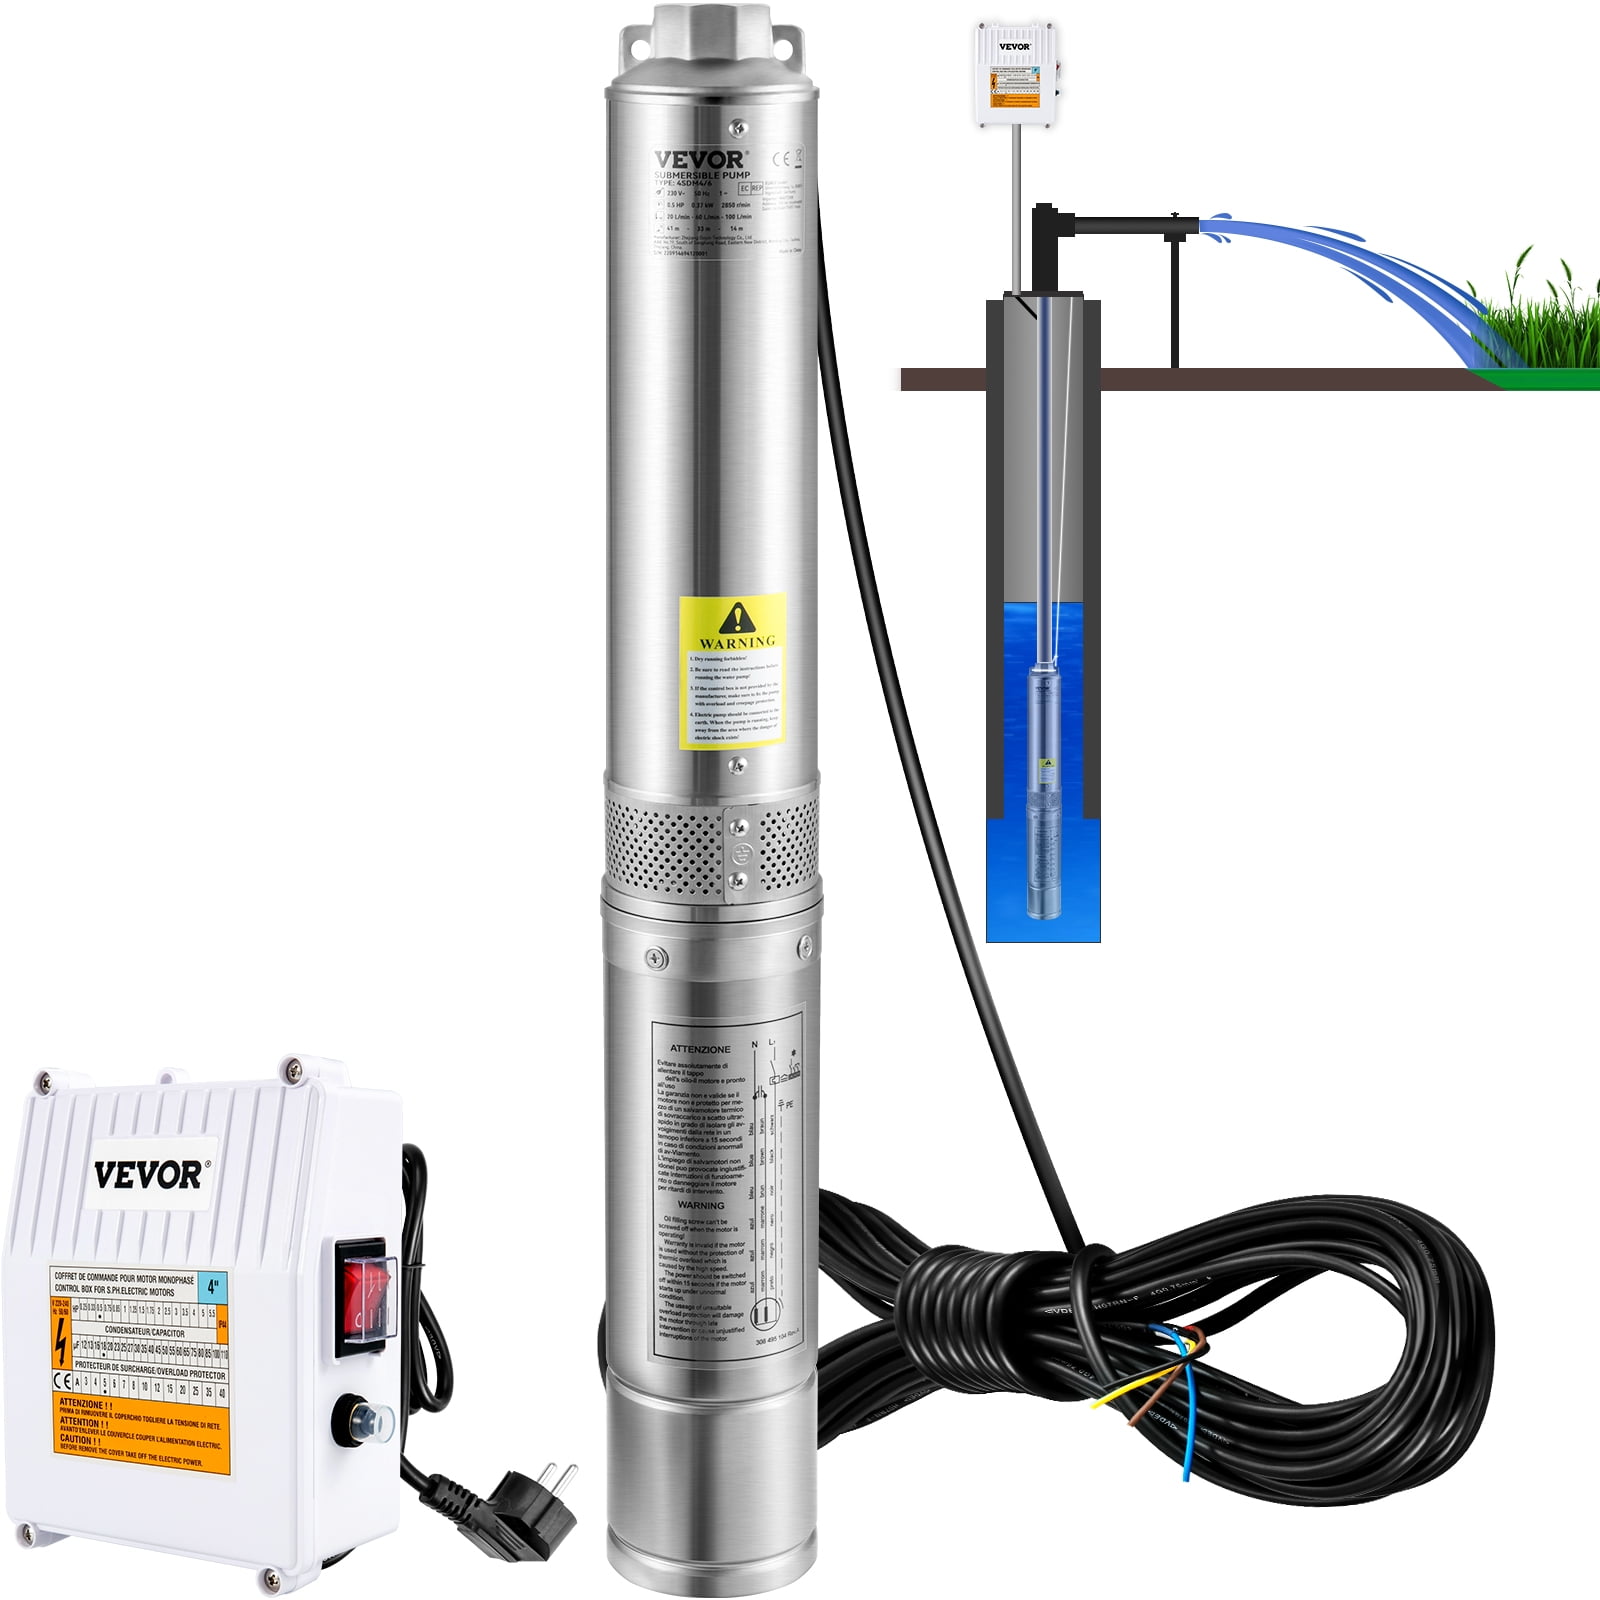 VEVOR Deep Well Submersible Pump, 3HP 230V/60Hz, 37GPM 640 ft Head, with 33  ft Cord  External Control Box, inch Stainless Steel Water Pumps for  Industrial, Irrigation and Home Use, IP68